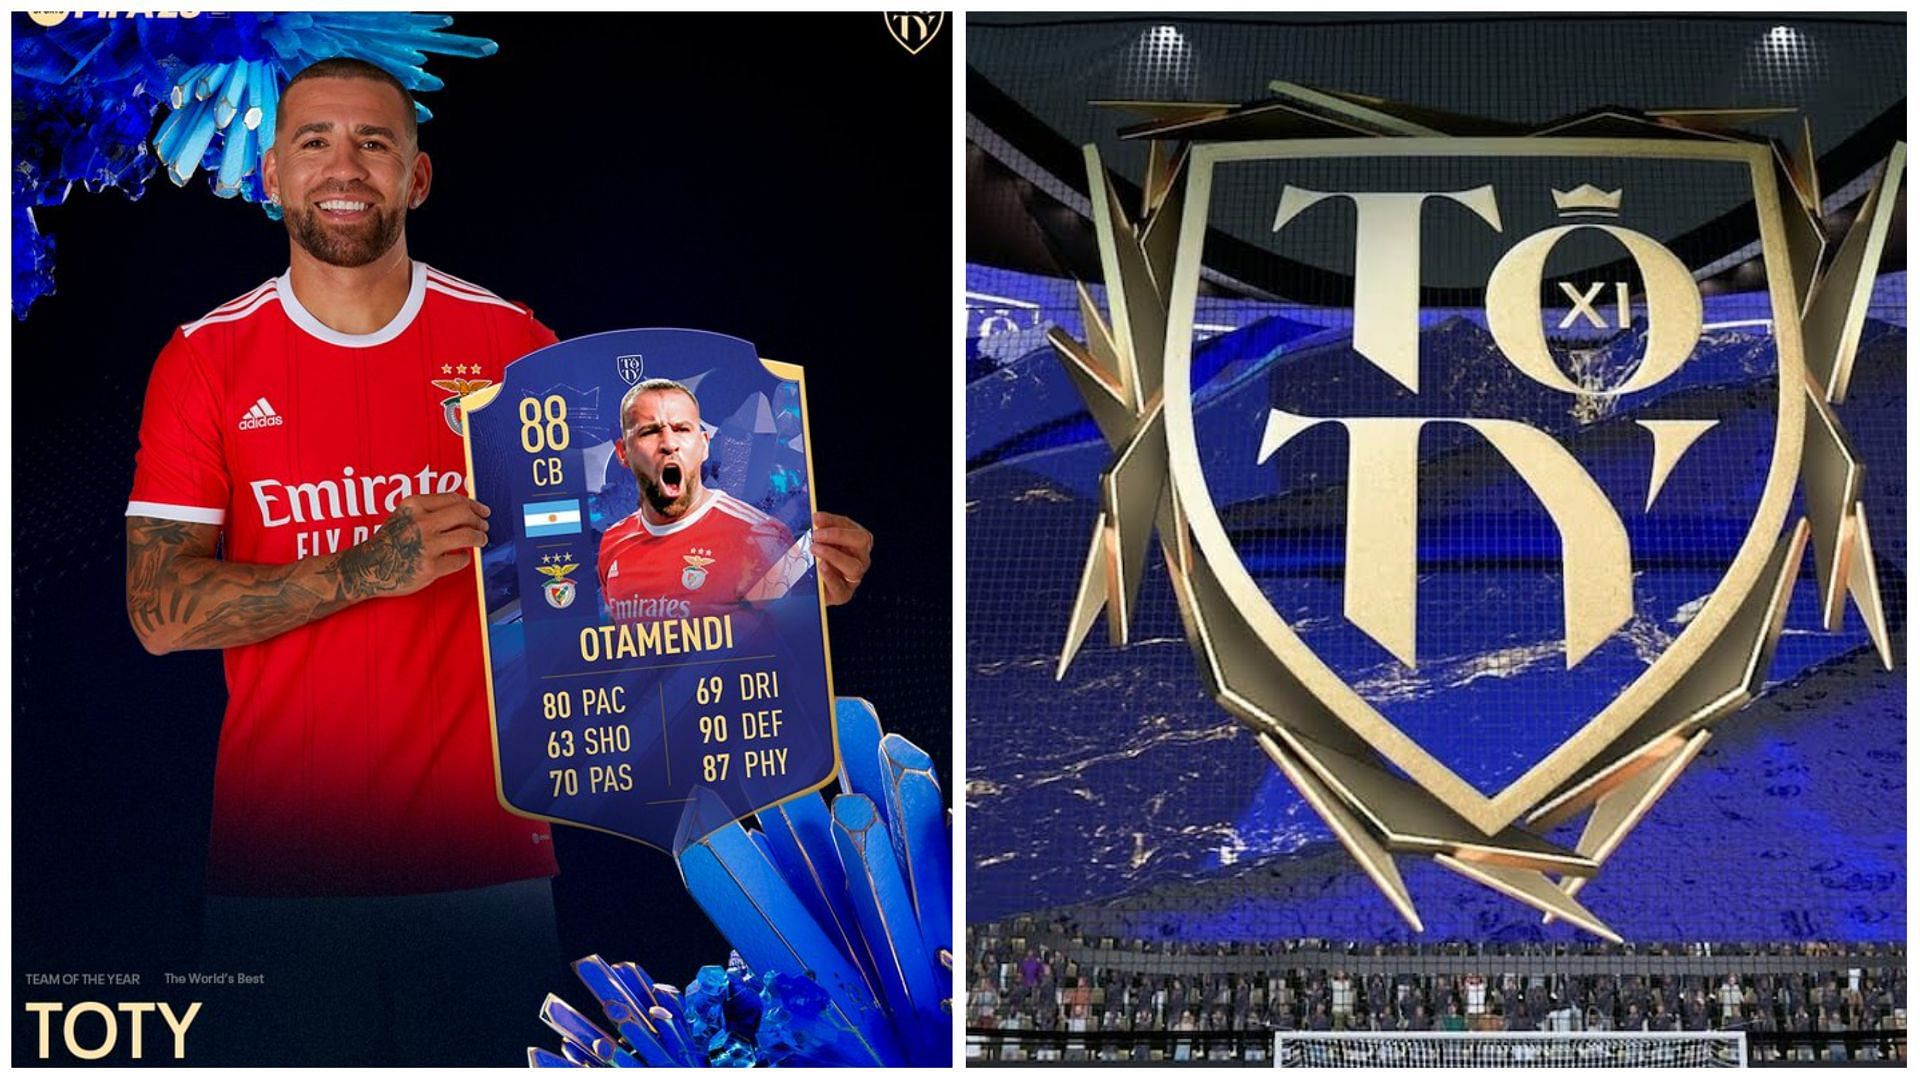 Nicolas Otamendi has received an objective card in FIFA 23 (Images via Twitter/SL Benfica and EA Sports)